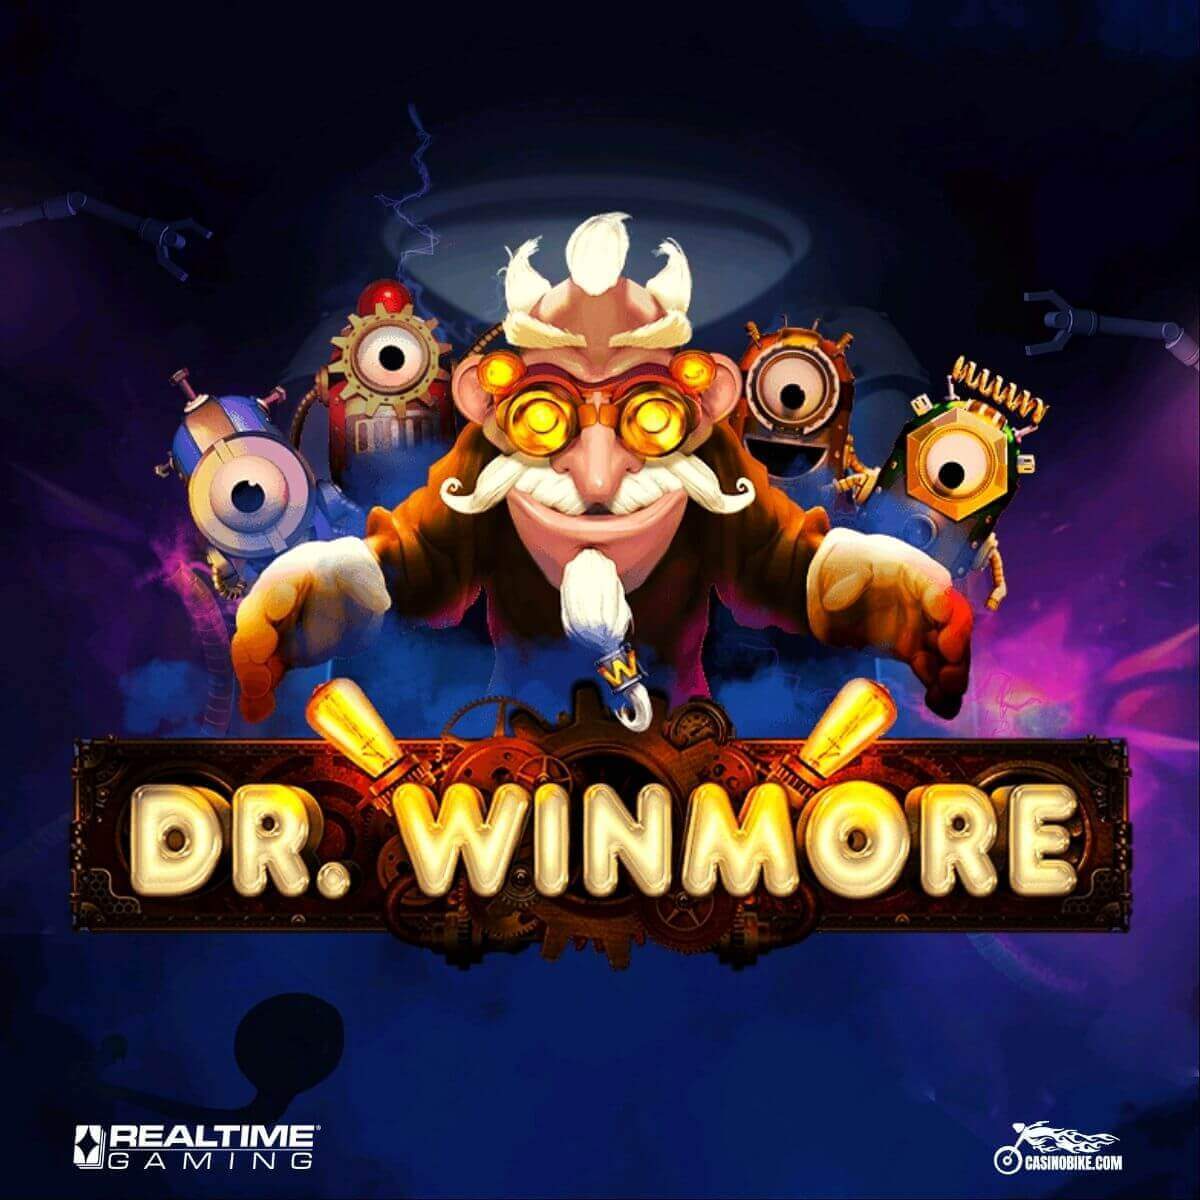 Dr. Winmore Slot 3 by Real Time Gaming